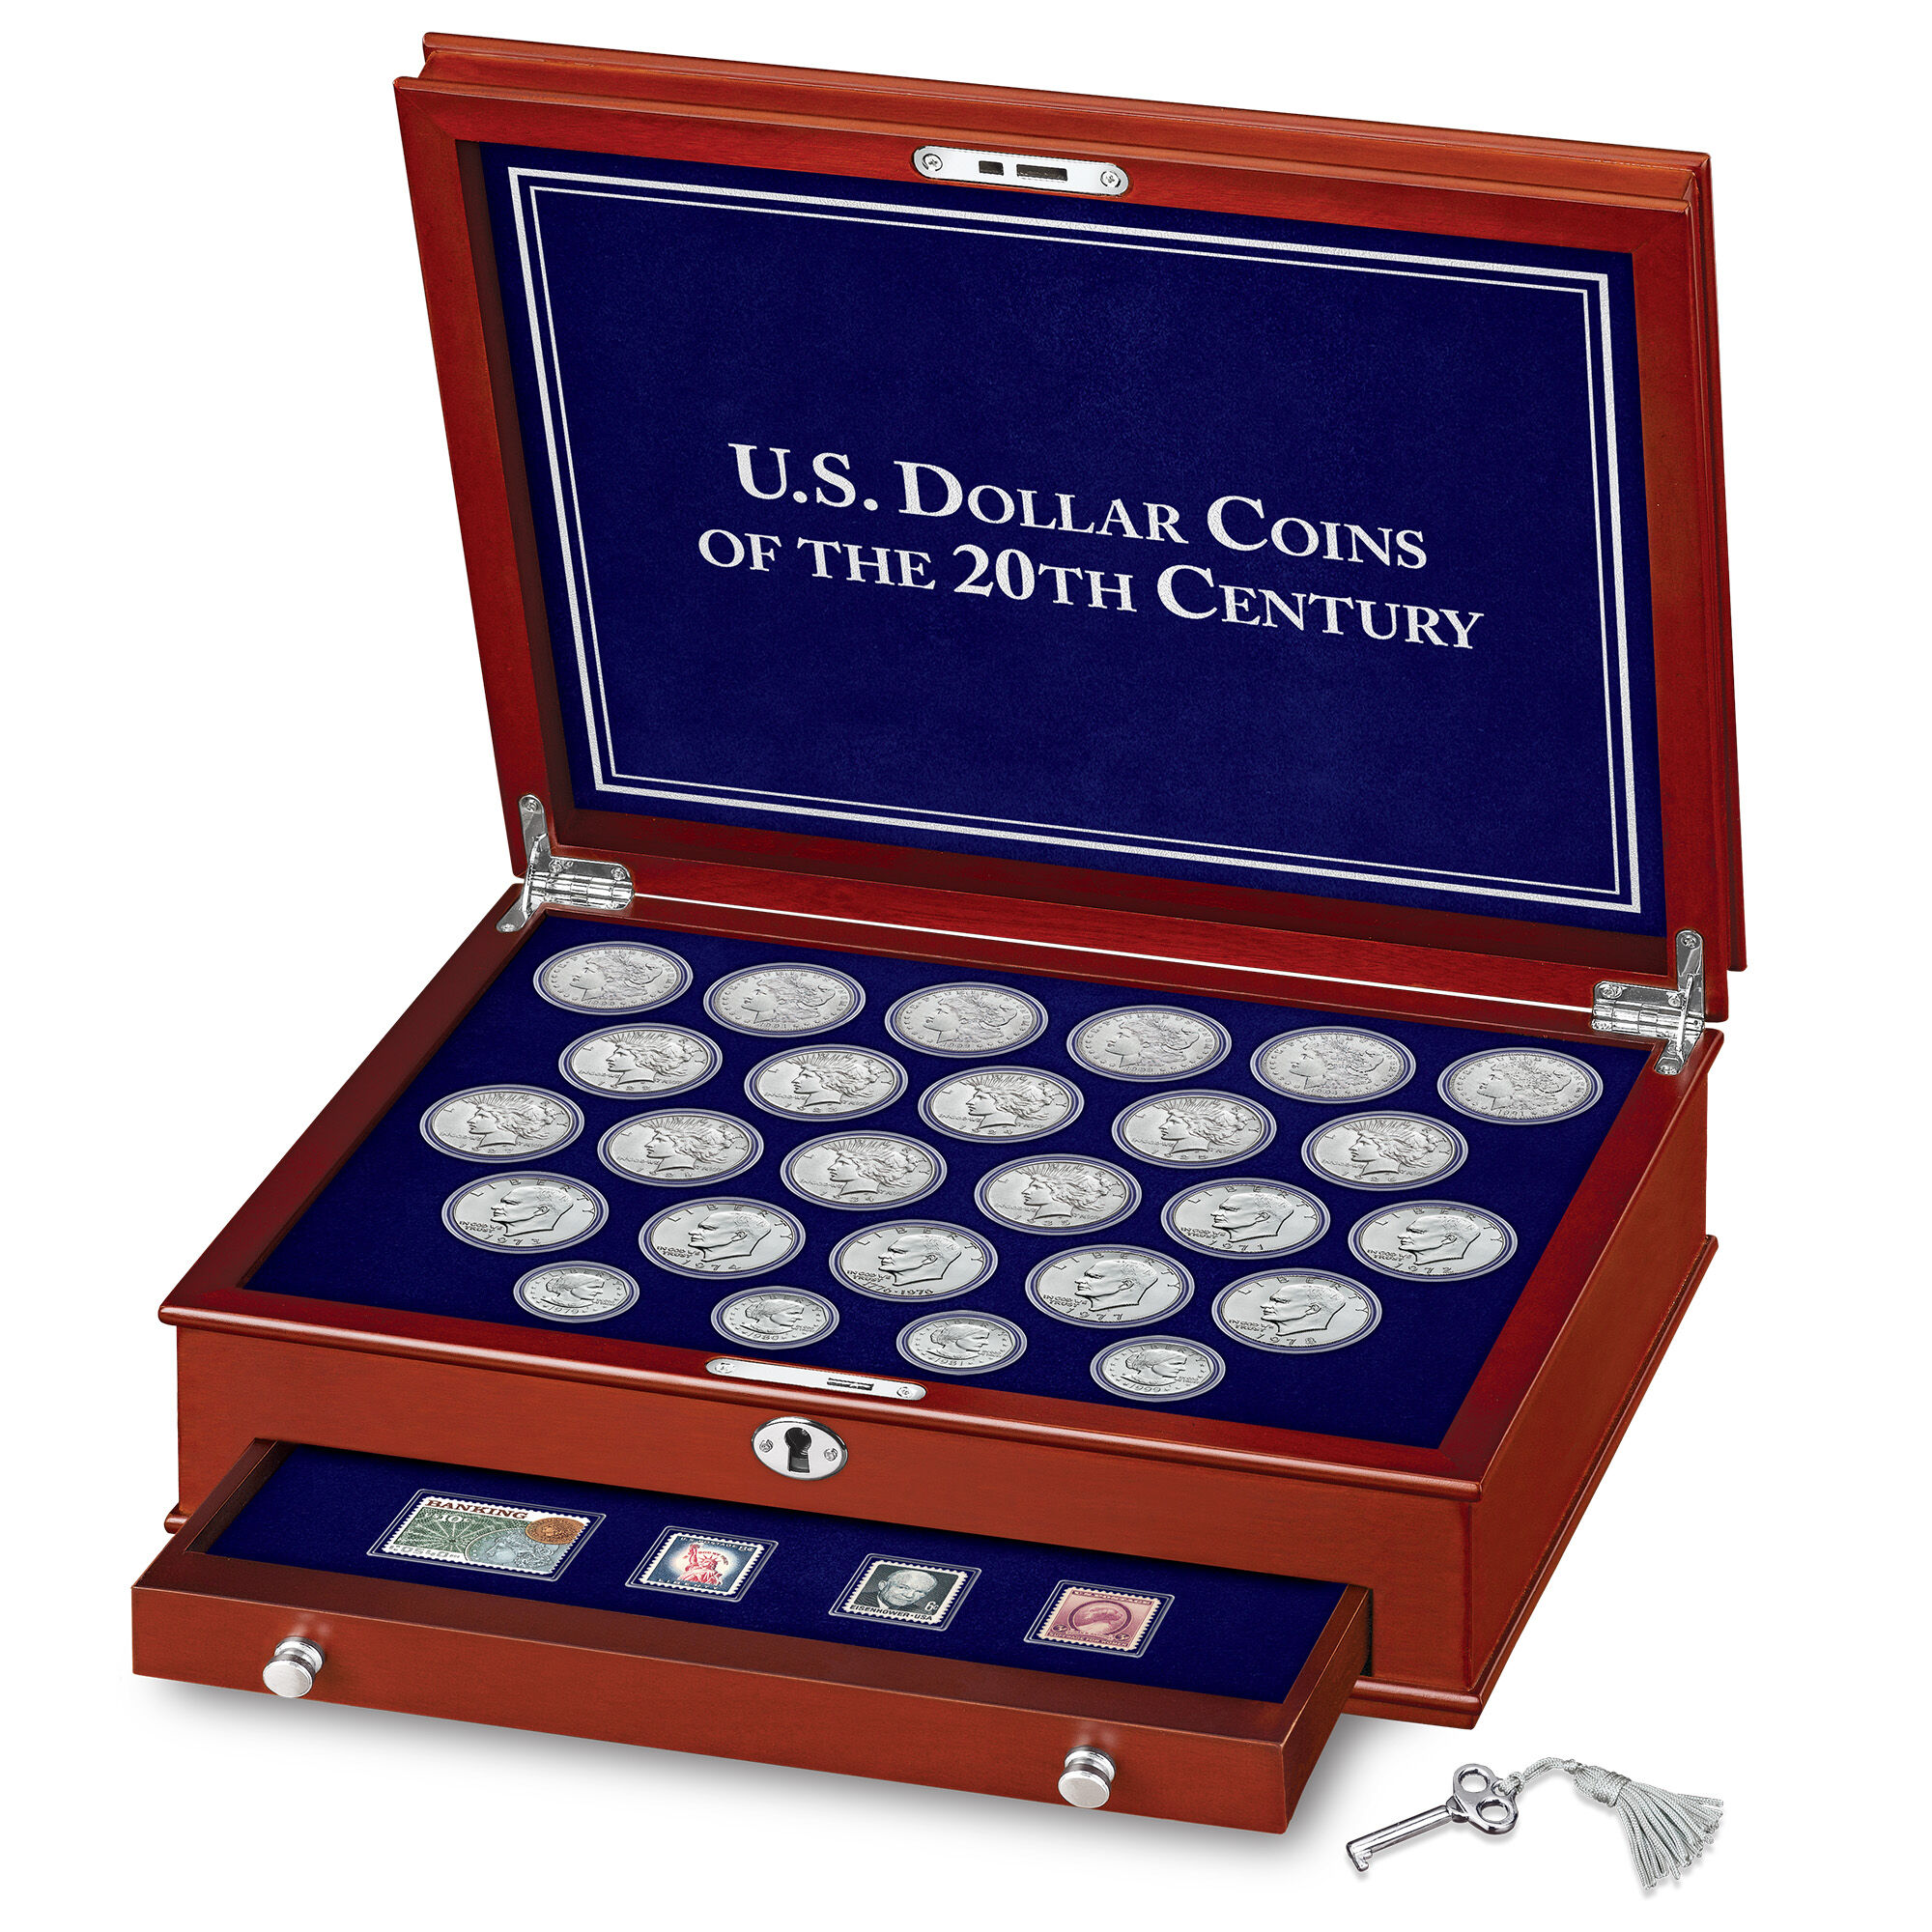 U.S. Dollar Coins of the 20th Century